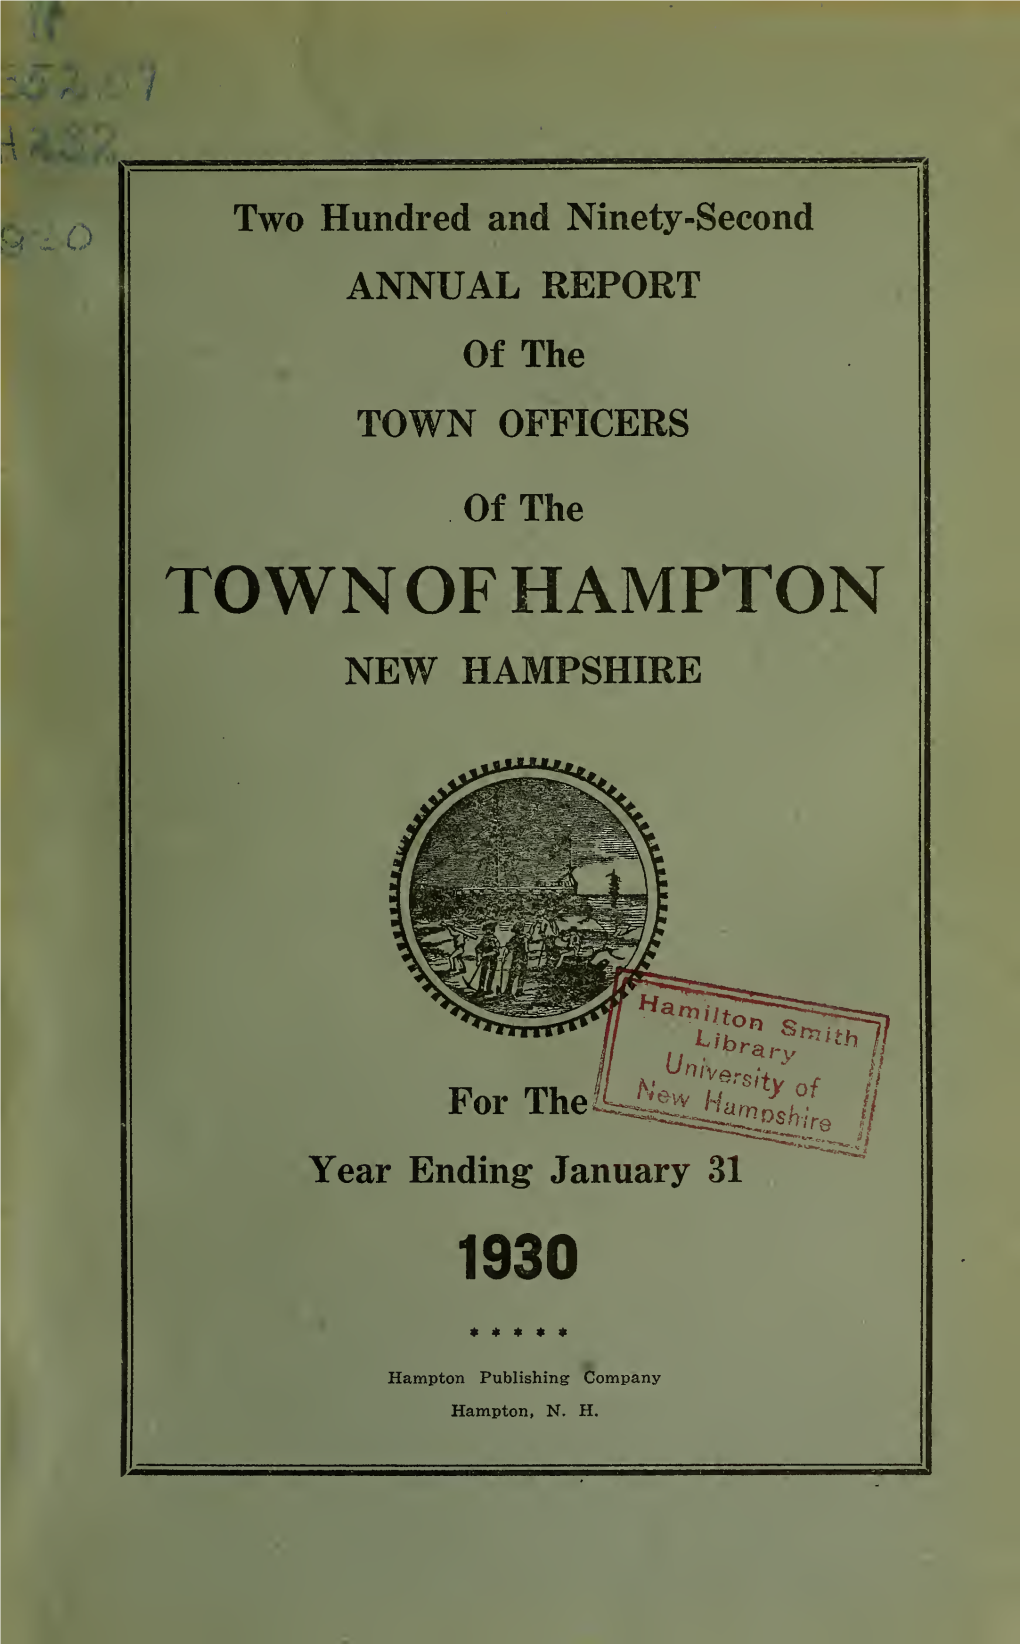 Two Hundred and Ninety-Second Annual Report of the Town Officers Of